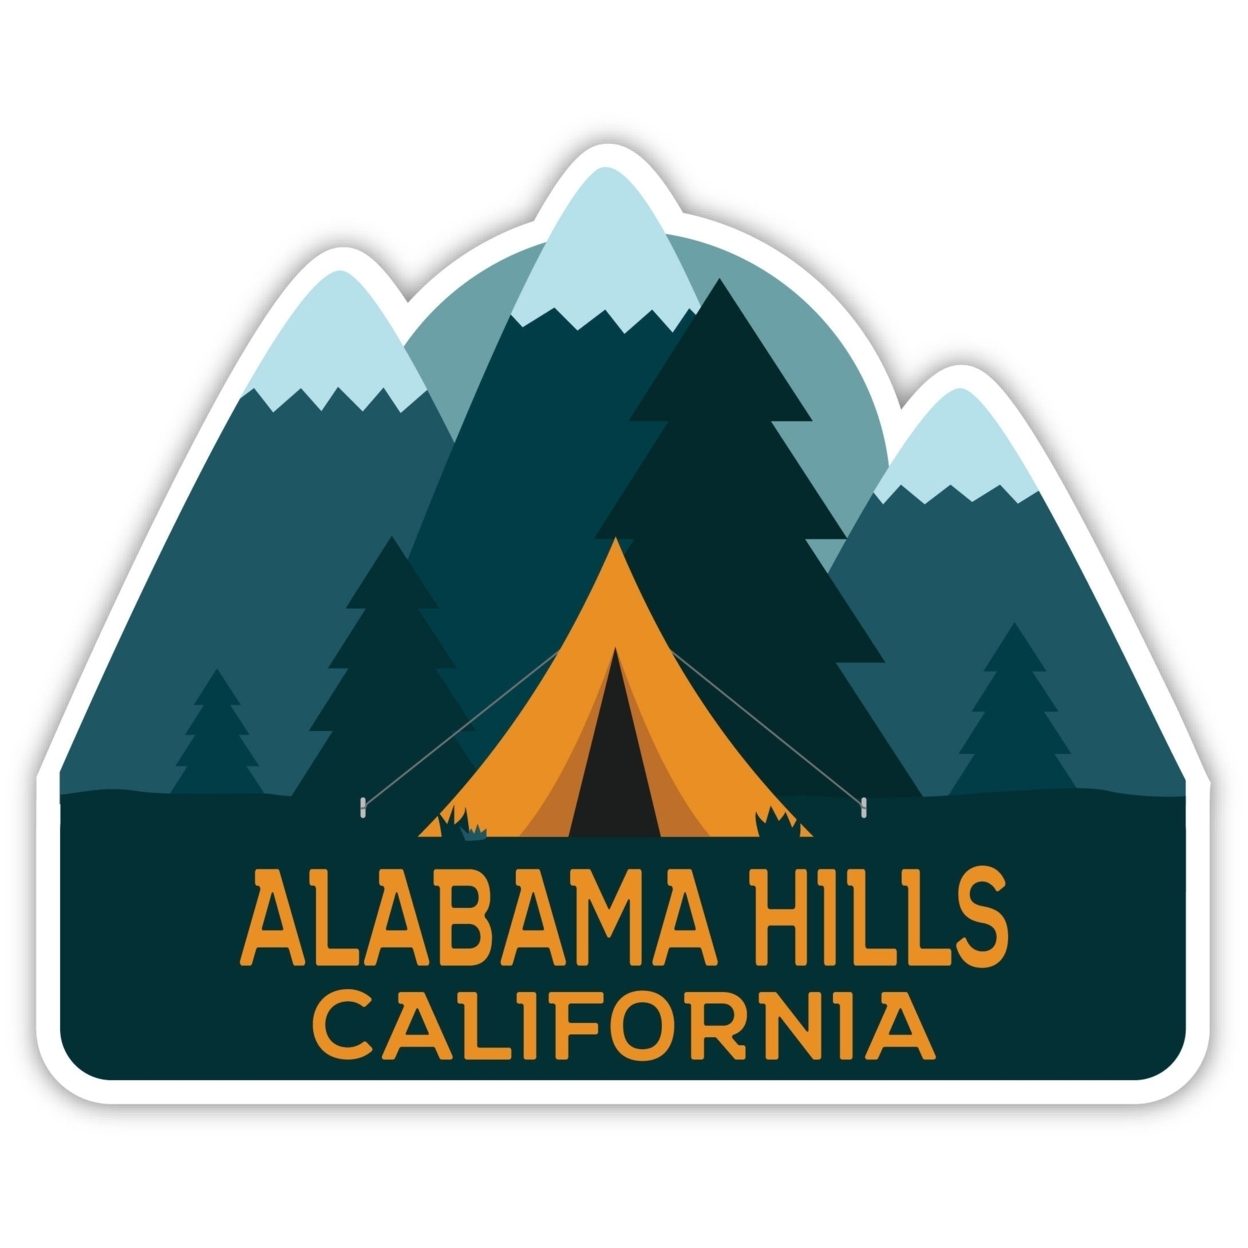 Alabama Hills California Souvenir Decorative Stickers (Choose Theme And Size) - 4-Pack, 6-Inch, Tent